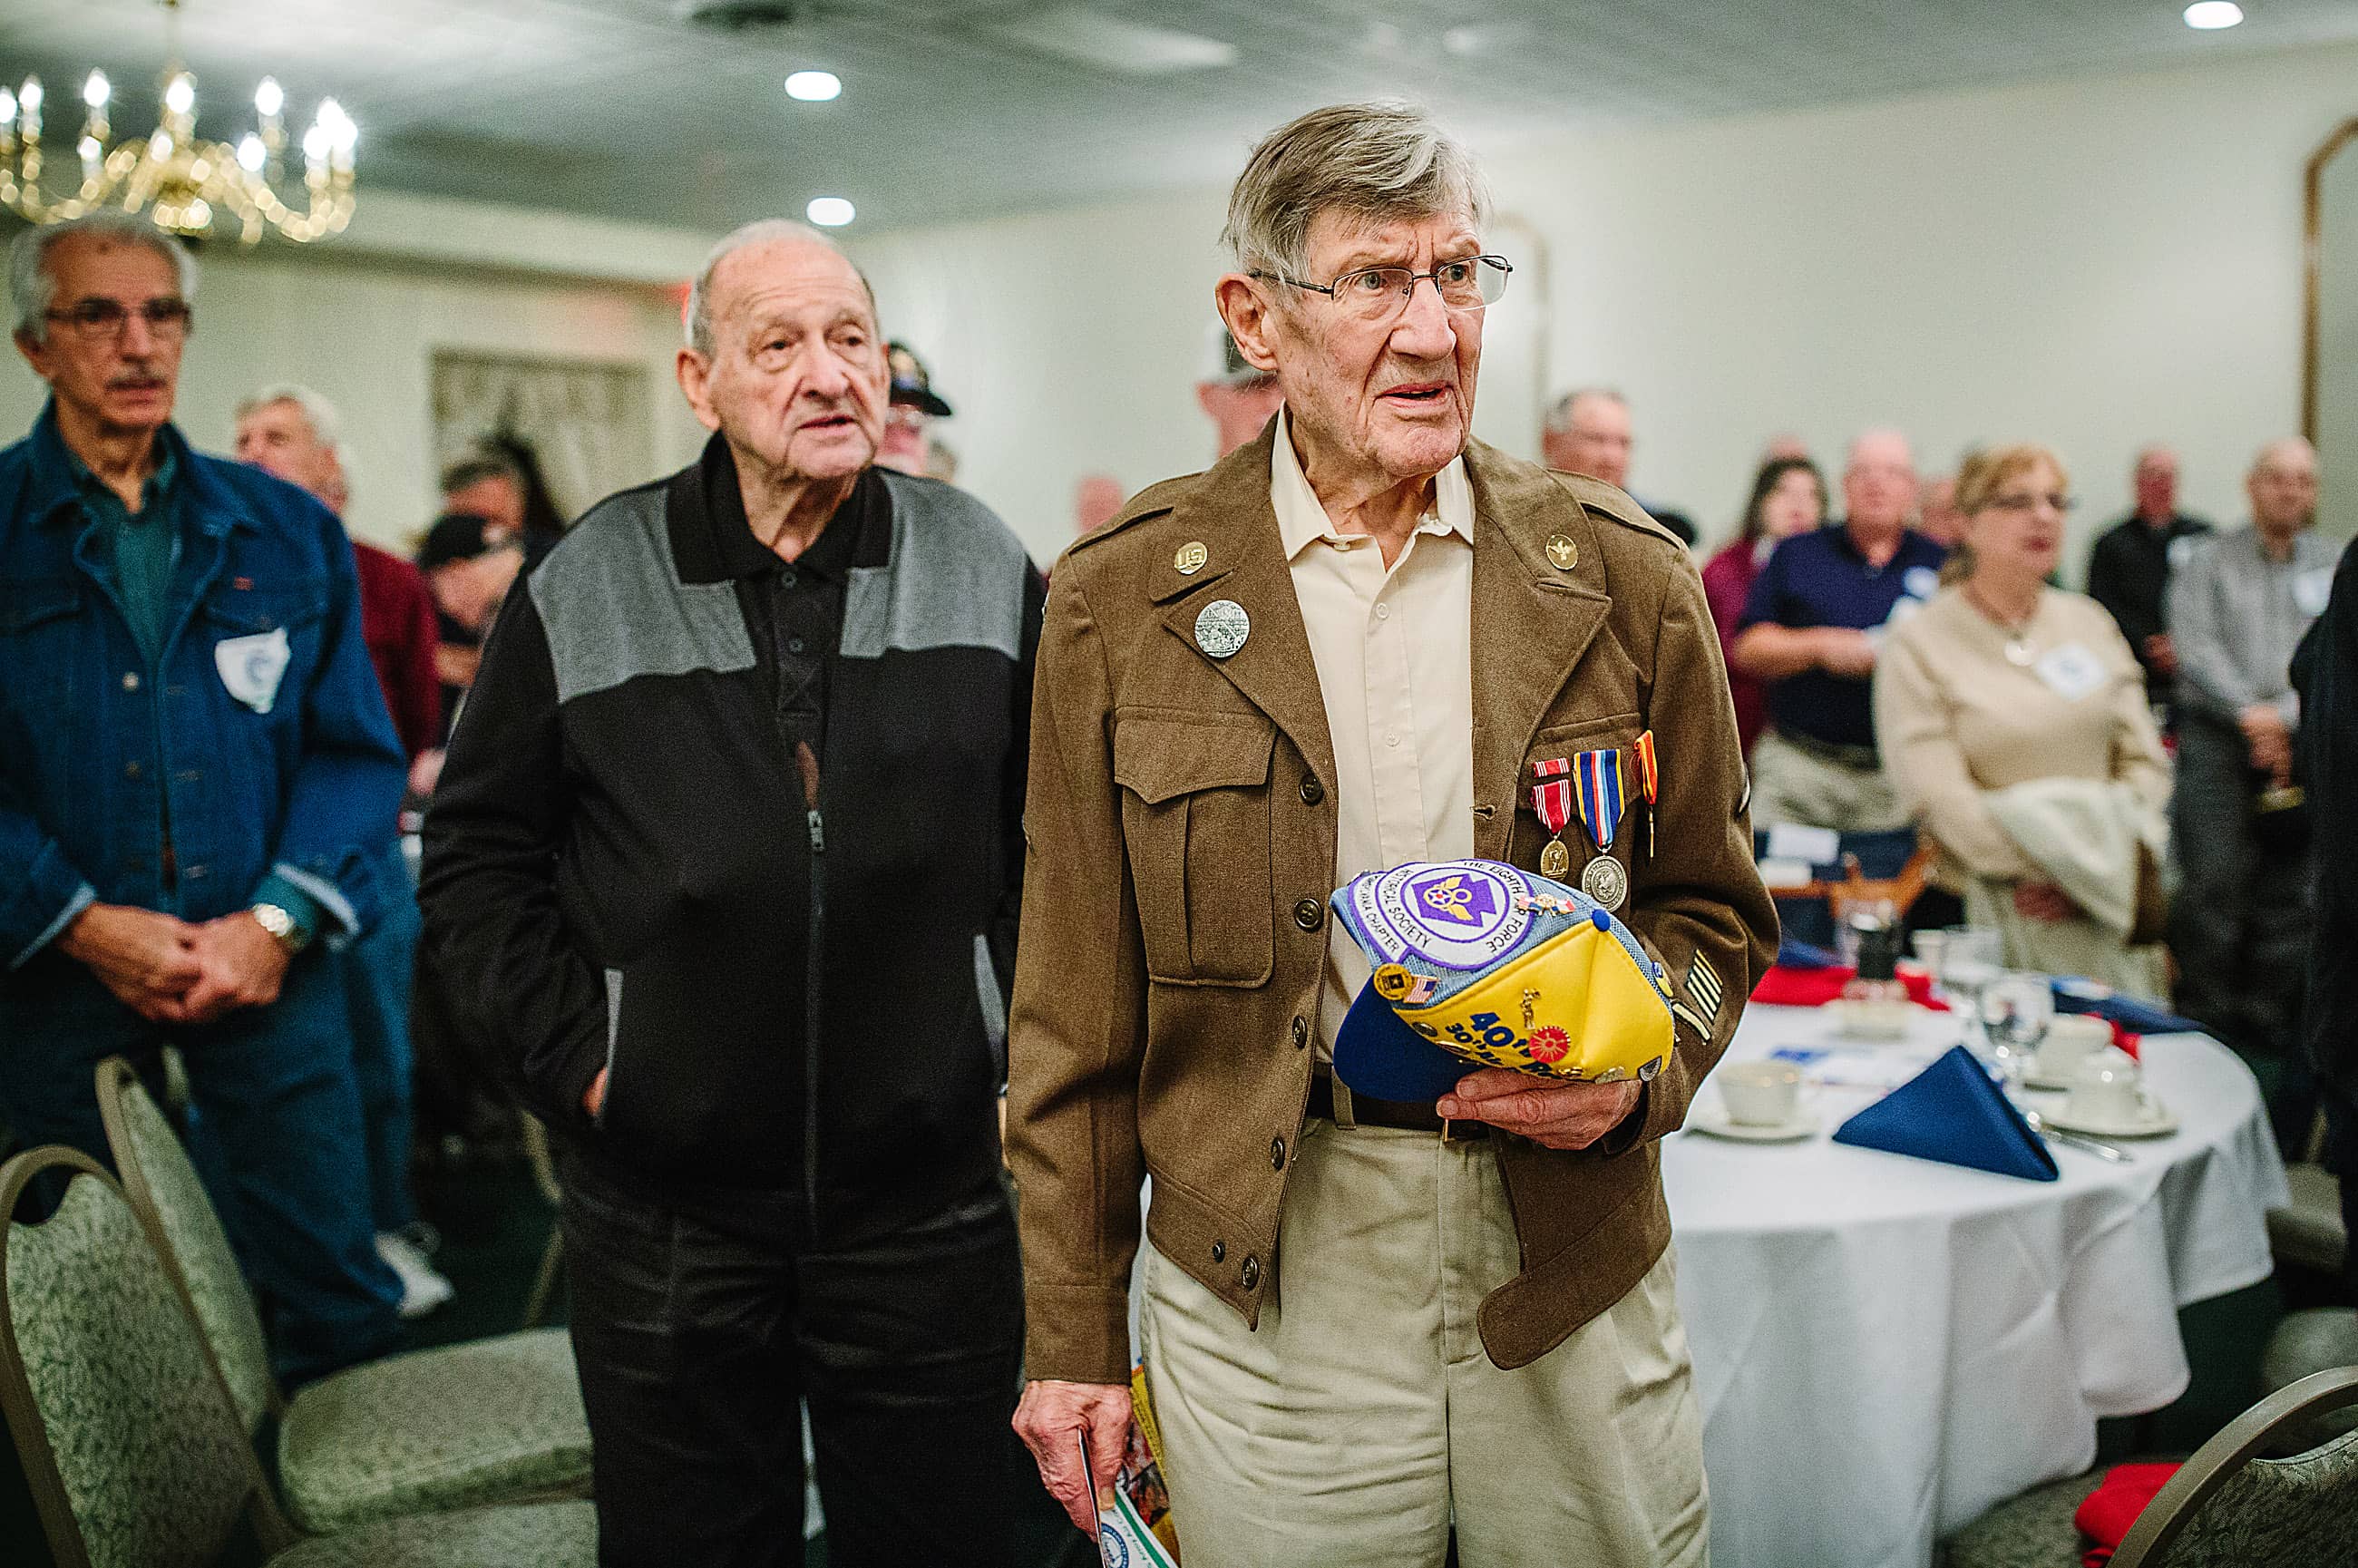 US Army Air Corps veteran Hartley Baird of Bethel Park, sings 'God Bless America' during a Veteran's Breakfast Club event at Salvator's Events and Catering in Baldwin on October 25, 2016. (Andrew Rush/Post-Gazette)